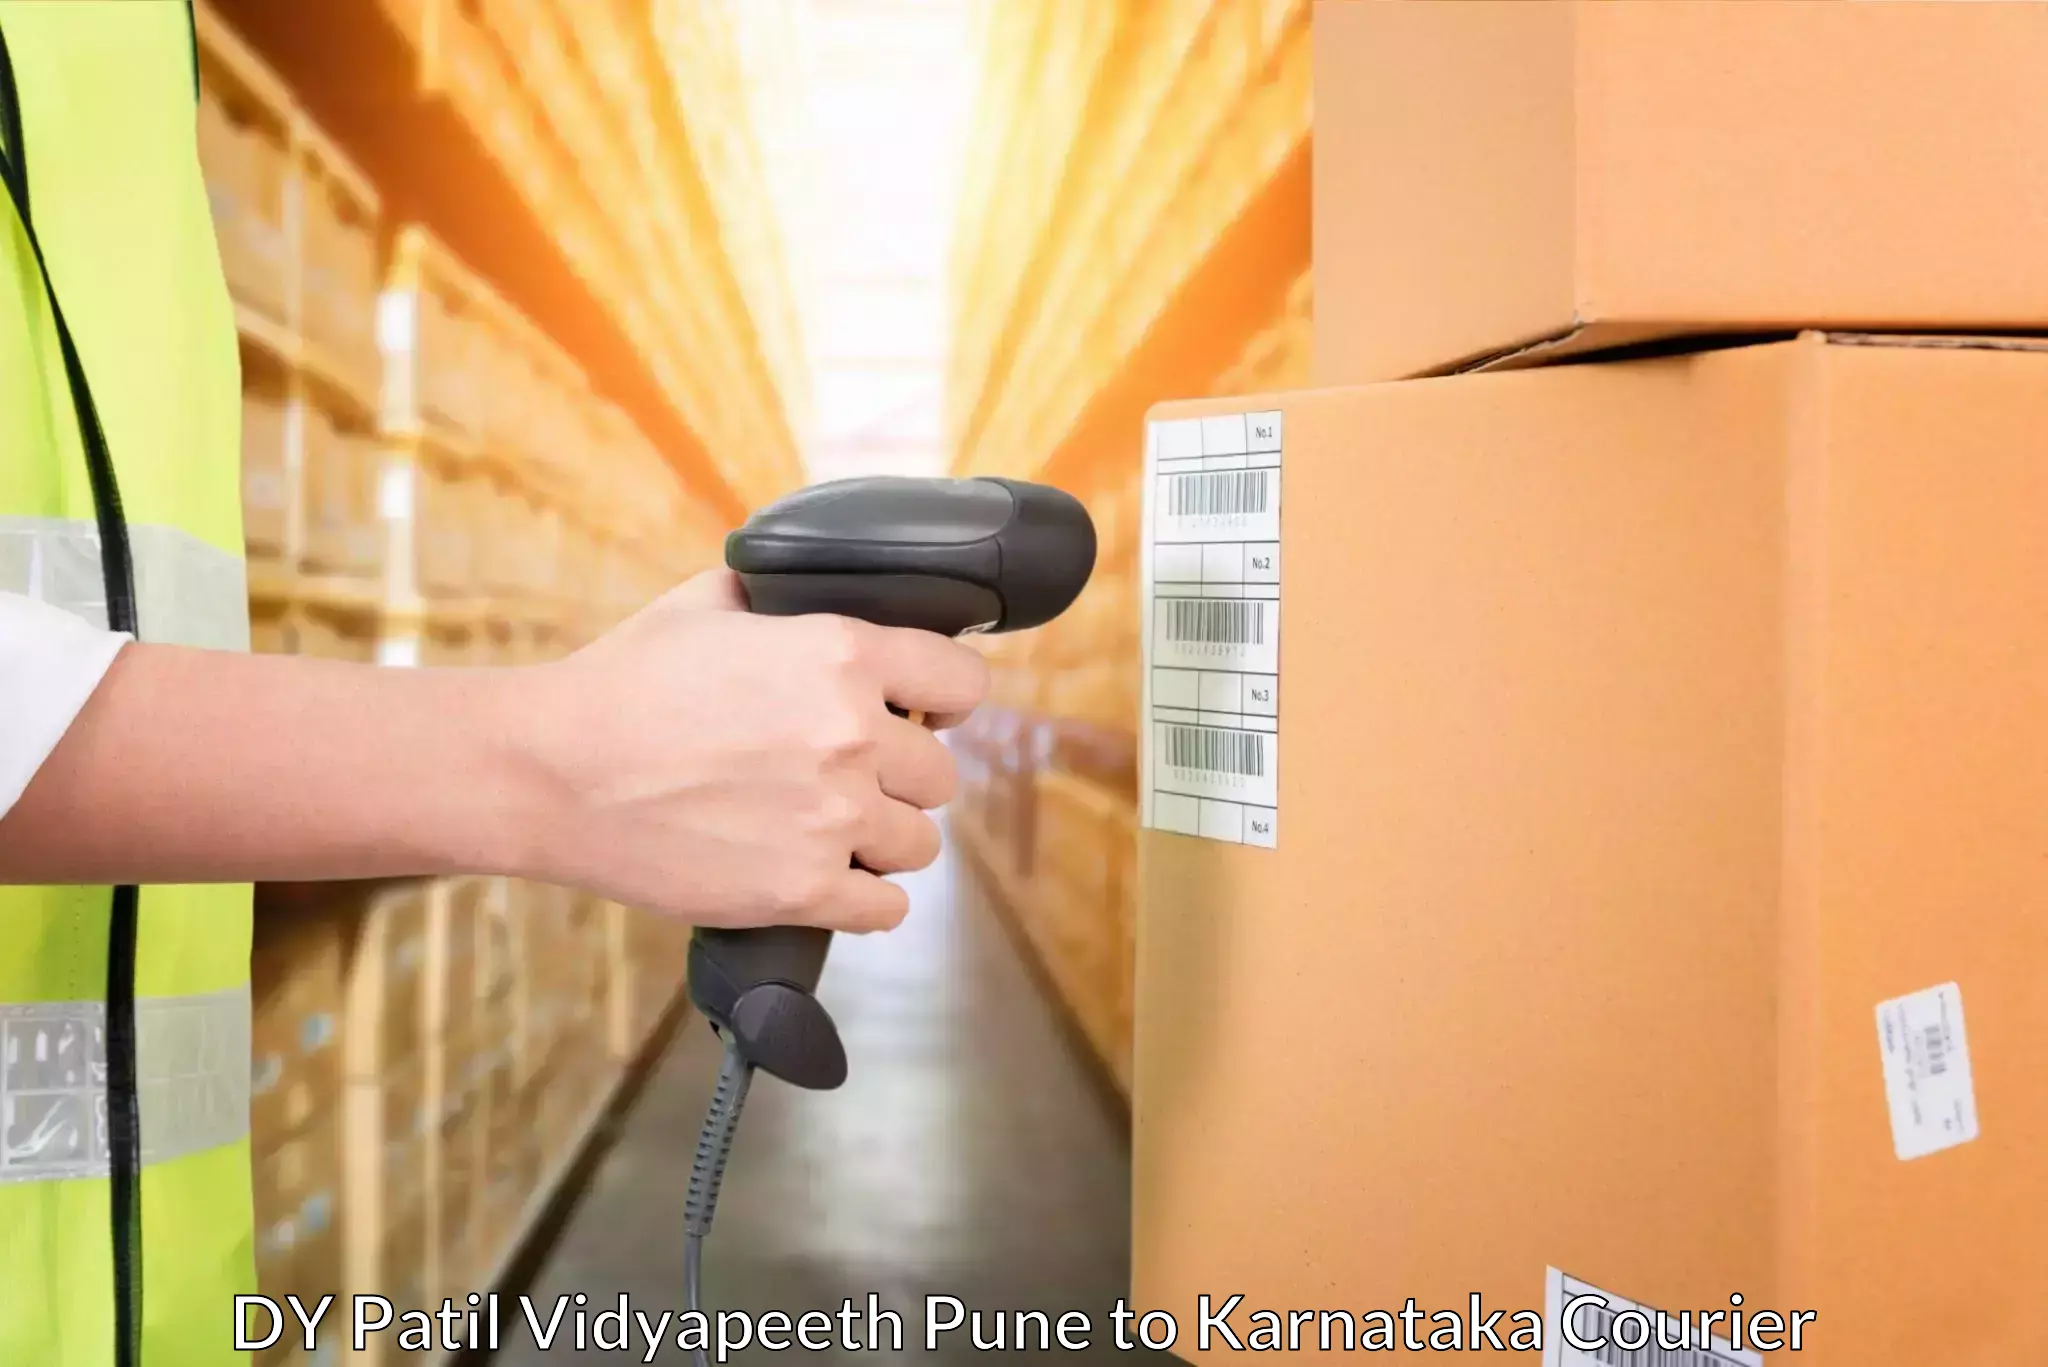 Professional courier services in DY Patil Vidyapeeth Pune to Karnataka